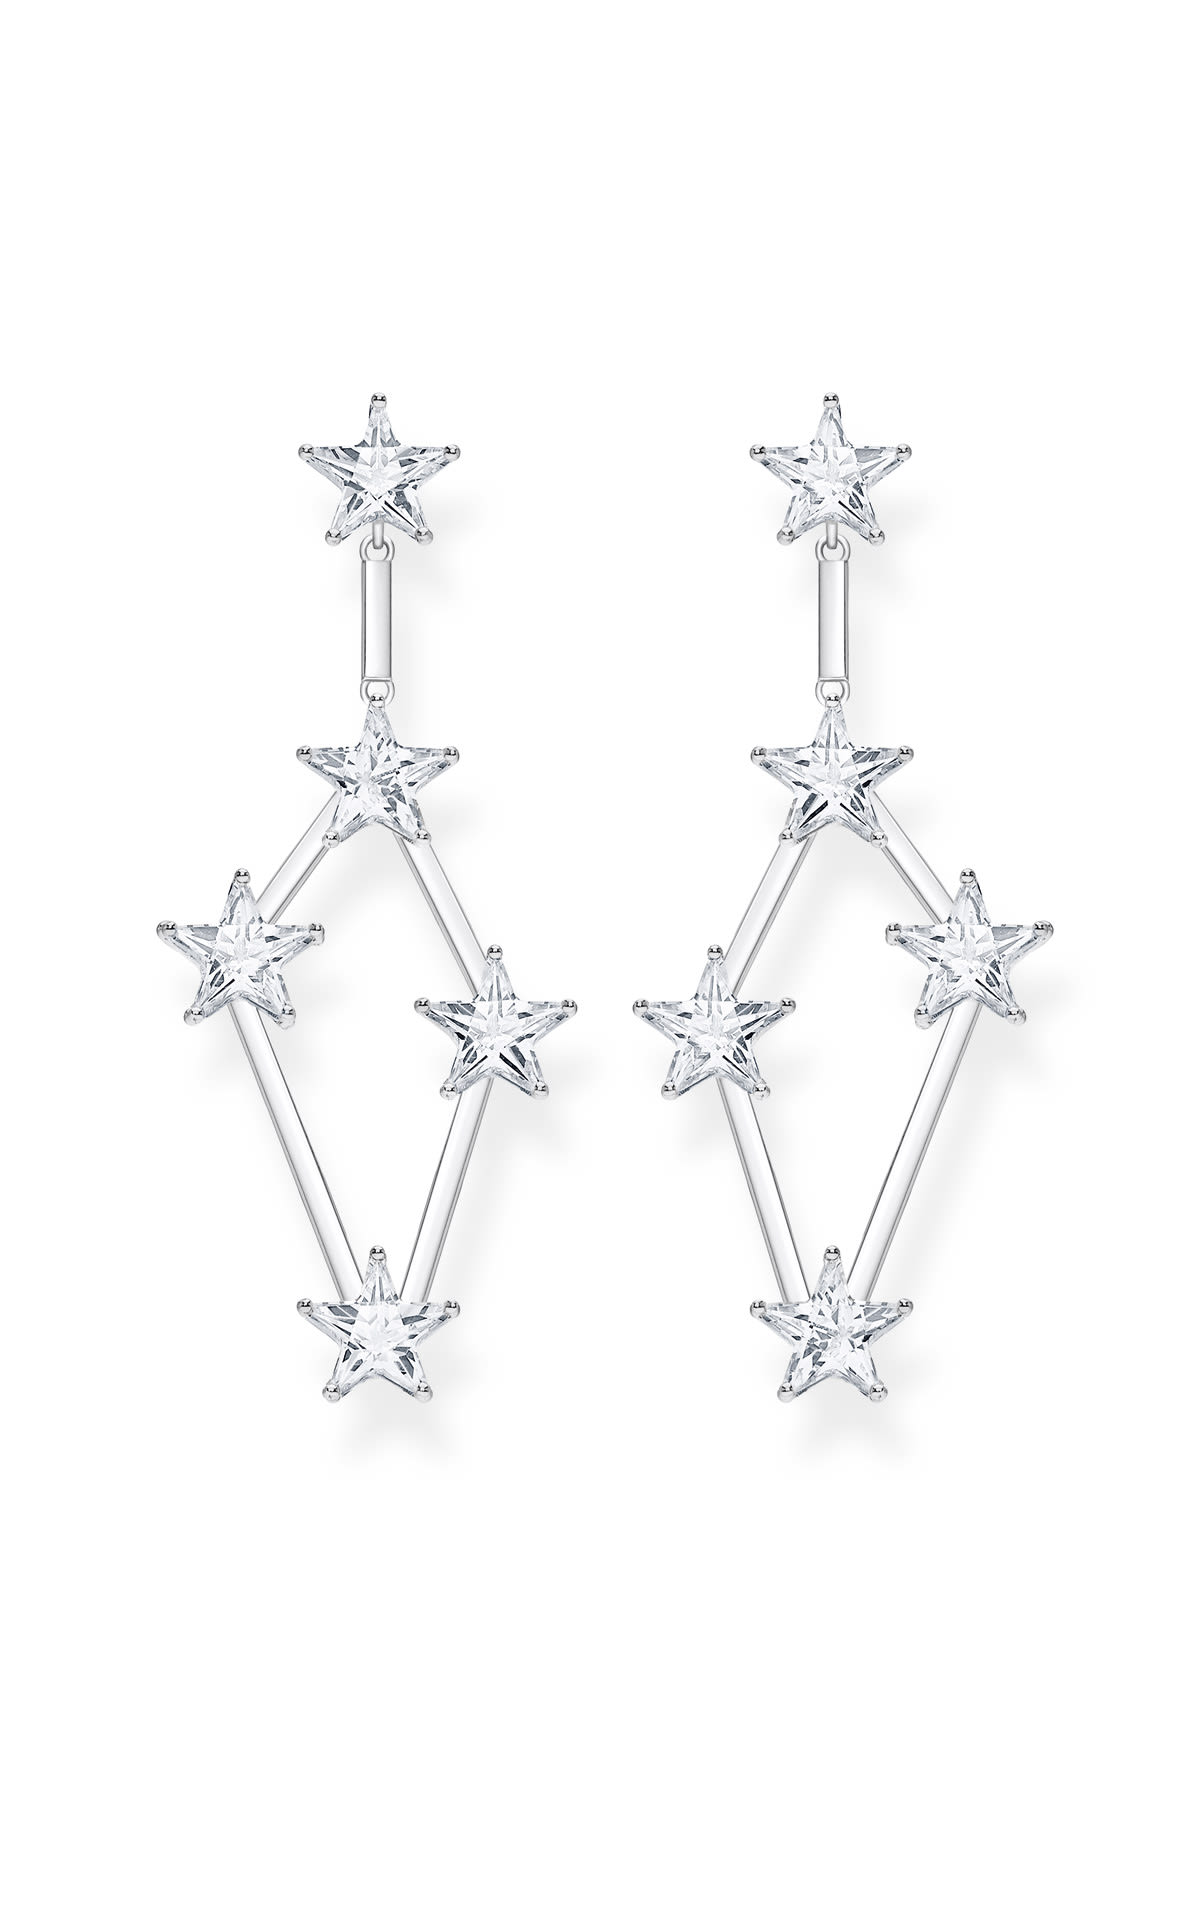 Long silver earrings with stars Thomas Sabo